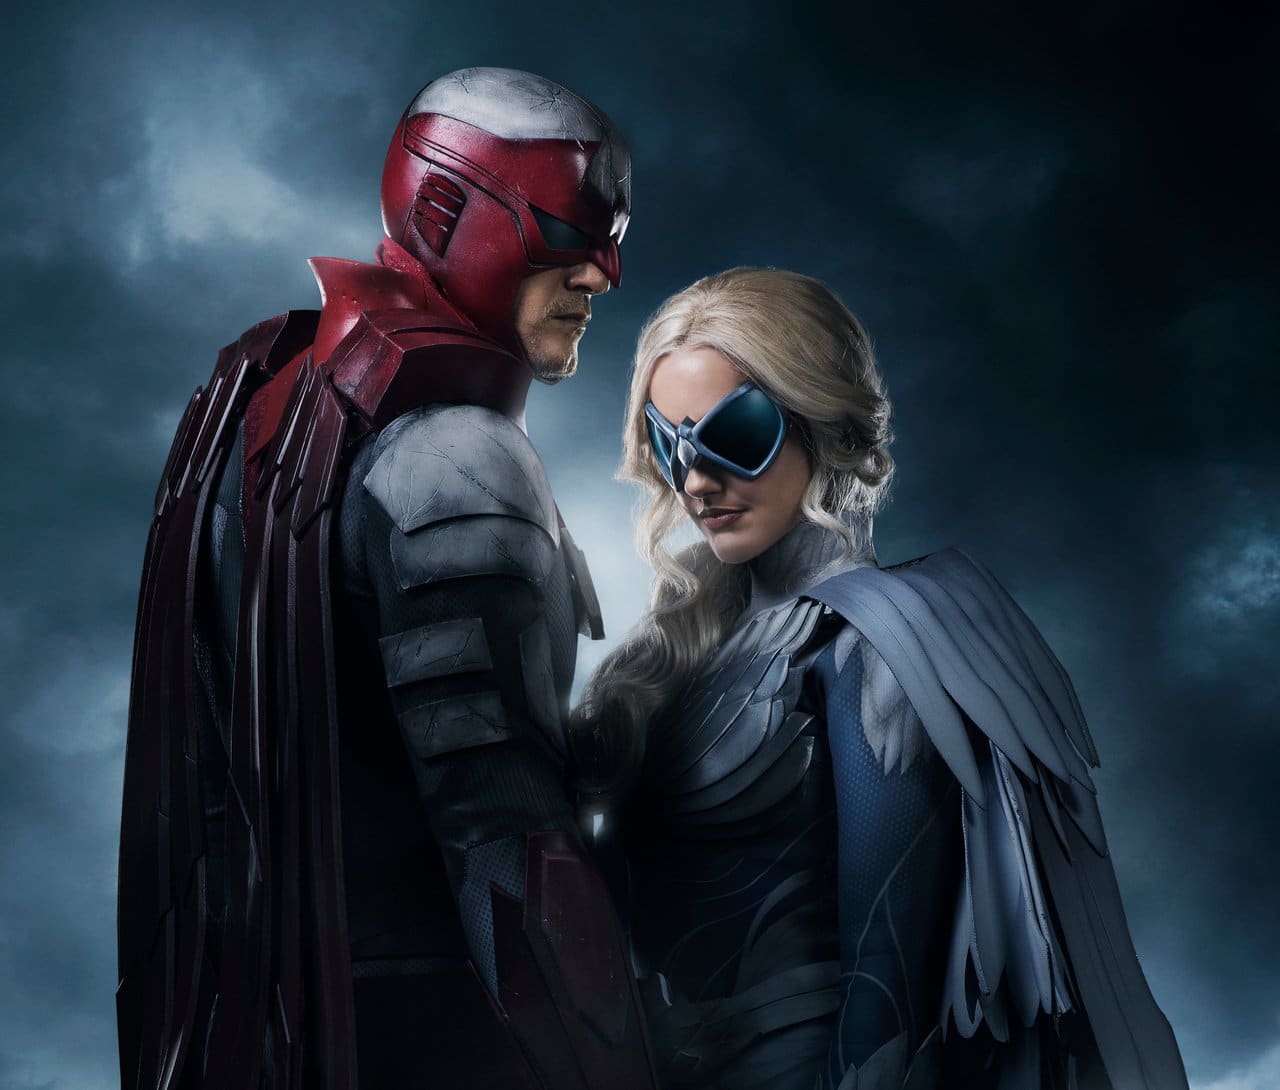 Geek insider, geekinsider, geekinsider. Com,, 'titans' s1e2 – we have the beginnings of our romantic storyline, entertainment